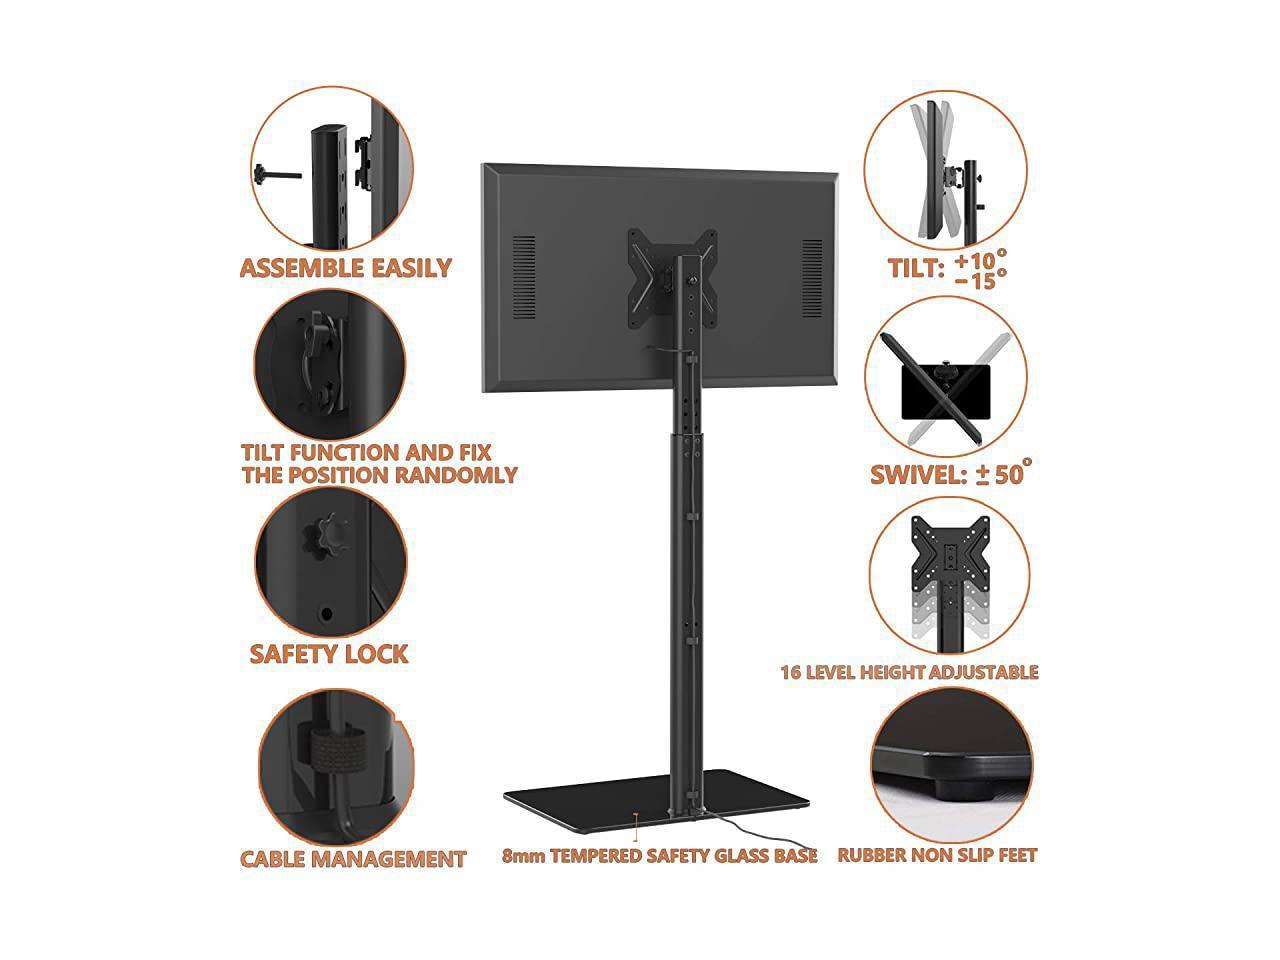 Universal TV Stand with Mount 100 Degree Swivel Height Adjustable and Tilt Function for 19 to 42 inch LCD LED OLED TVs,HT1001B 